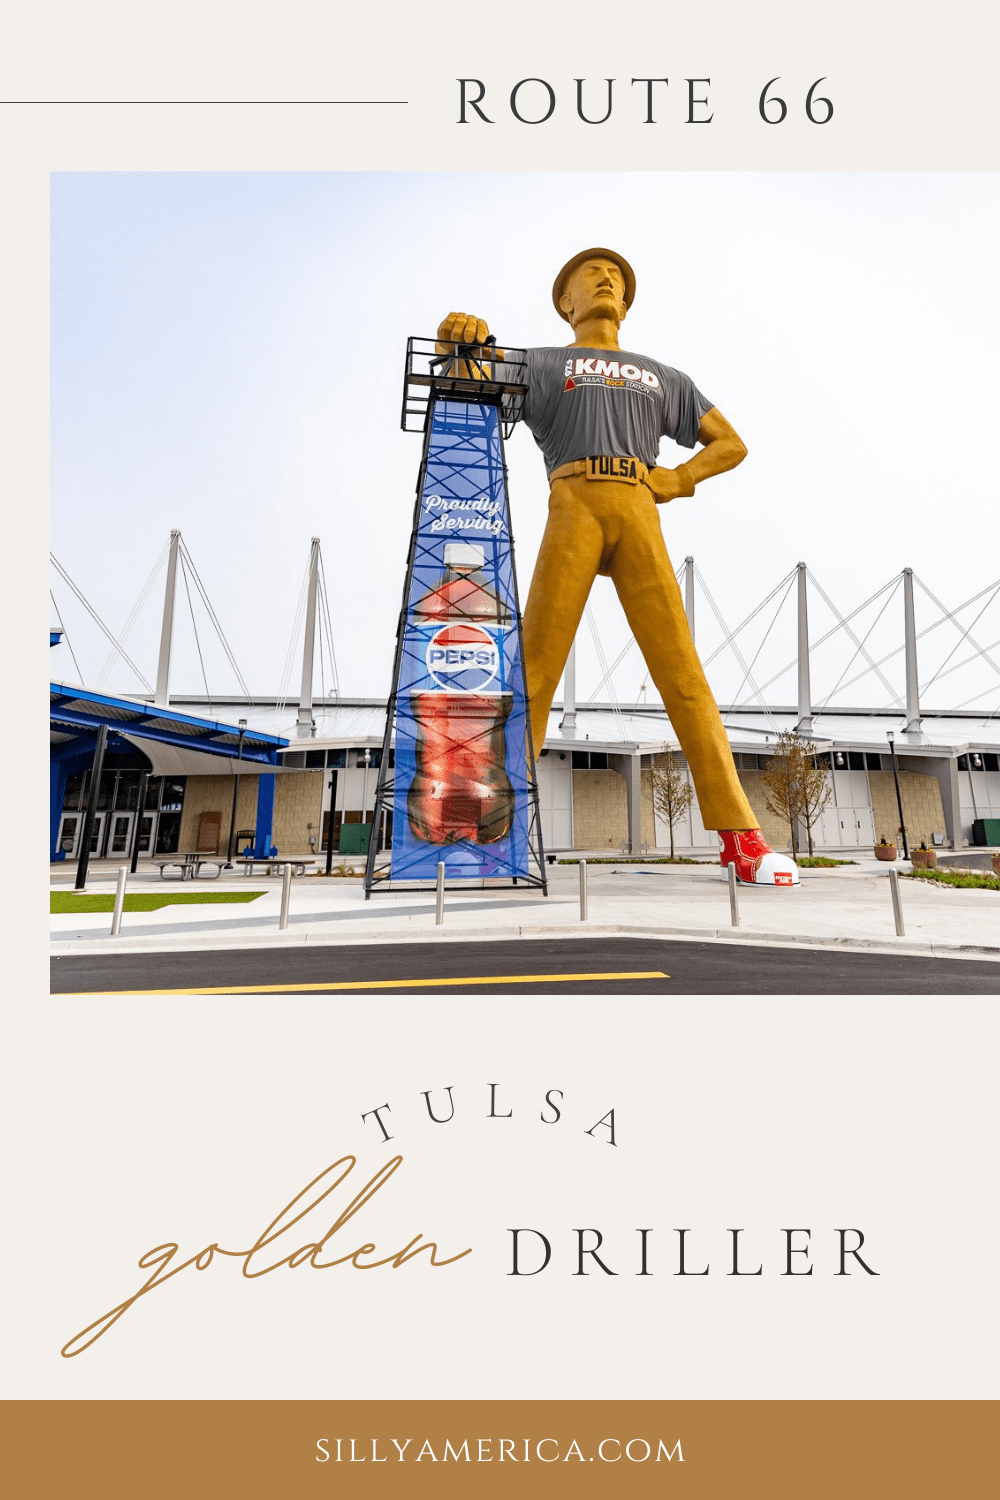 You might call this big man the golden child of roadside attractions. Meet the Golden Driller statue in Tulsa, Oklahoma. The Golden Driller stands at 75-feet tall, weighs 43,500 pounds. Across his belt buckle is a giant printed TULSA. This giant sculpture is a must-see Oklahoma roadside attraction to visit on a Route 66 road trip or Tulsa vacation.  #TULSA #TulsaOklahoma #RoadTripStop  #Oklahoma #OklahomaRoadTrip #RoadsideAttractions #RoadsideAttraction #RoadsideAmerica 